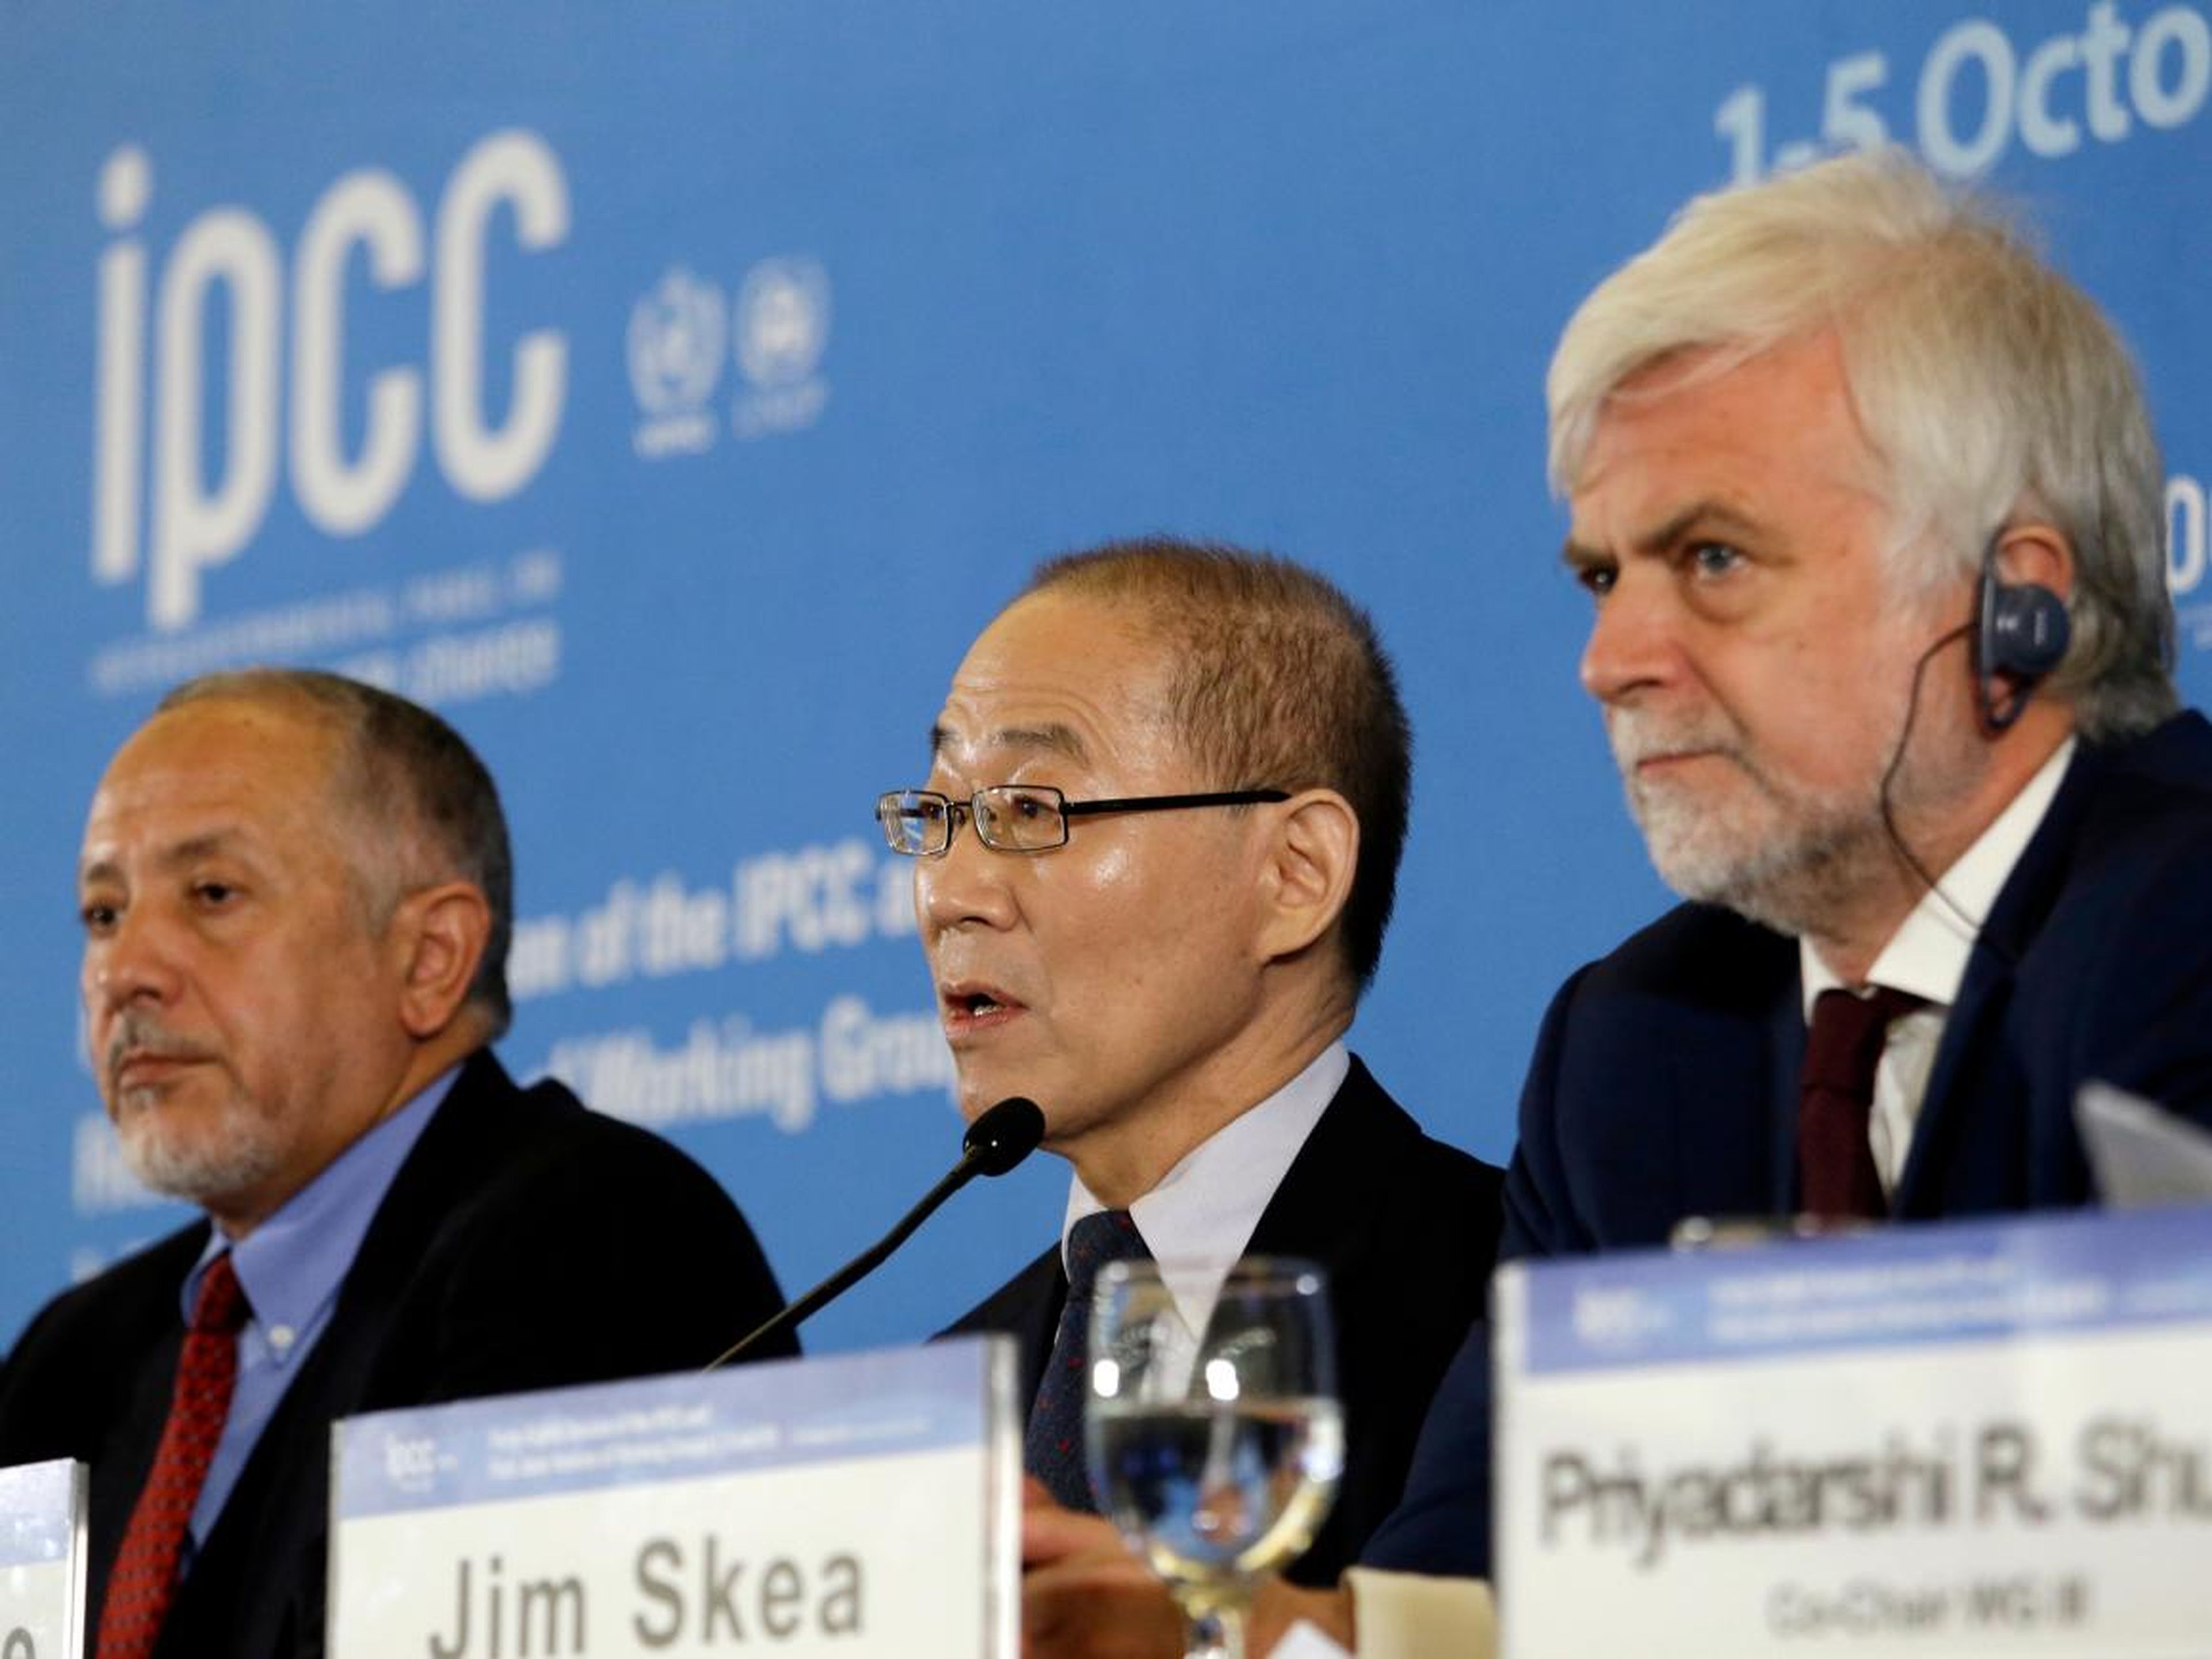 Last year, the IPCC warned that we only have until 2030 to act in order to avoid the worst consequences of severe climate change.